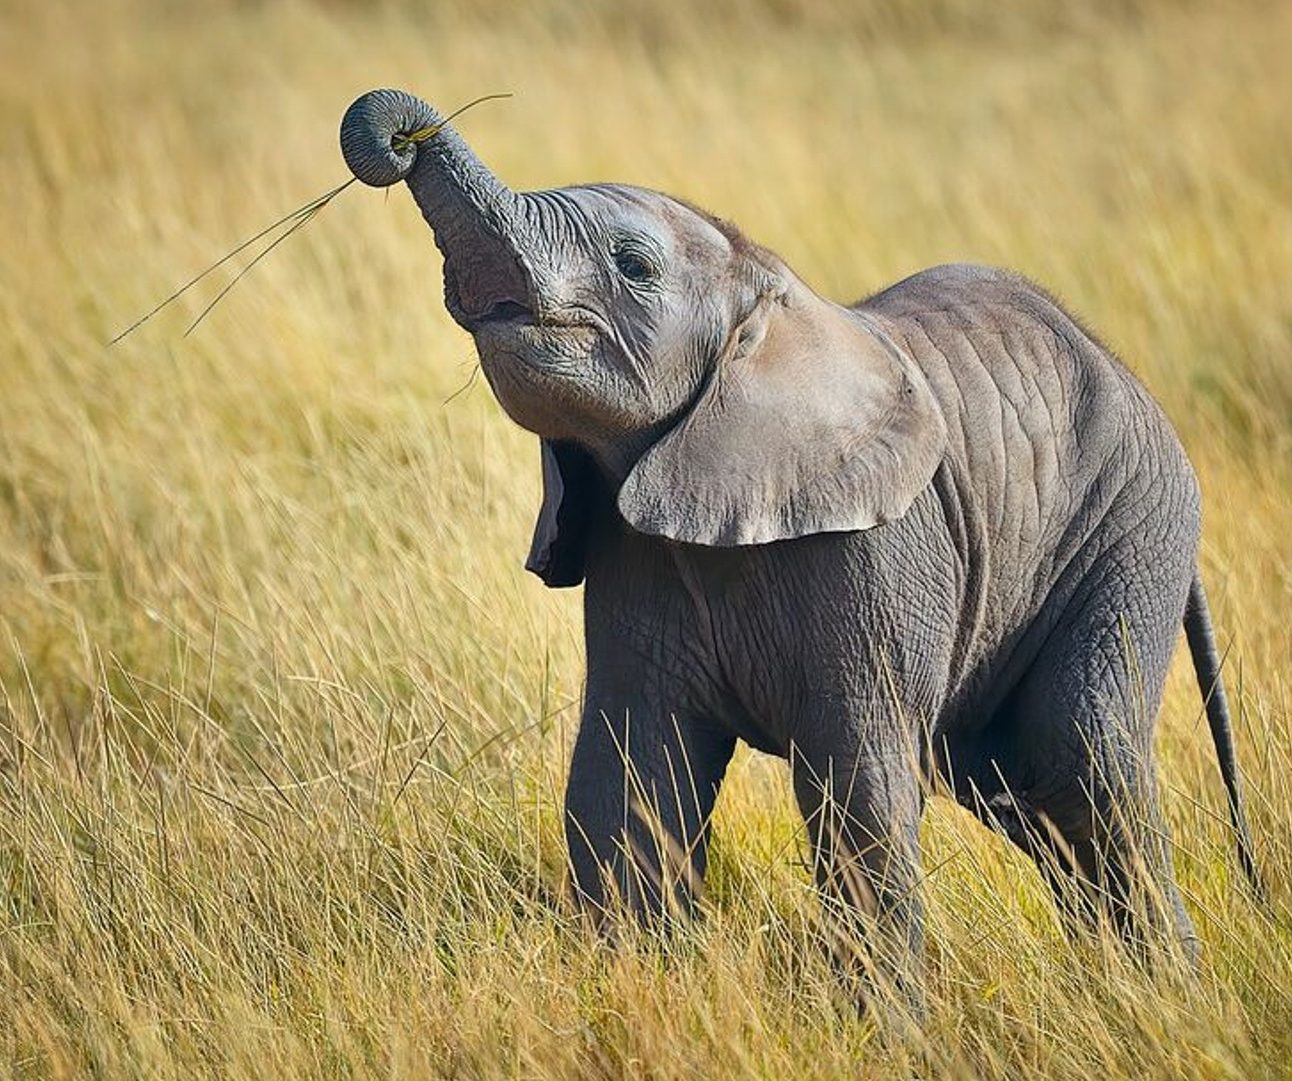 A baby elephant standing in long grass raising up its trunk which is holding a stick